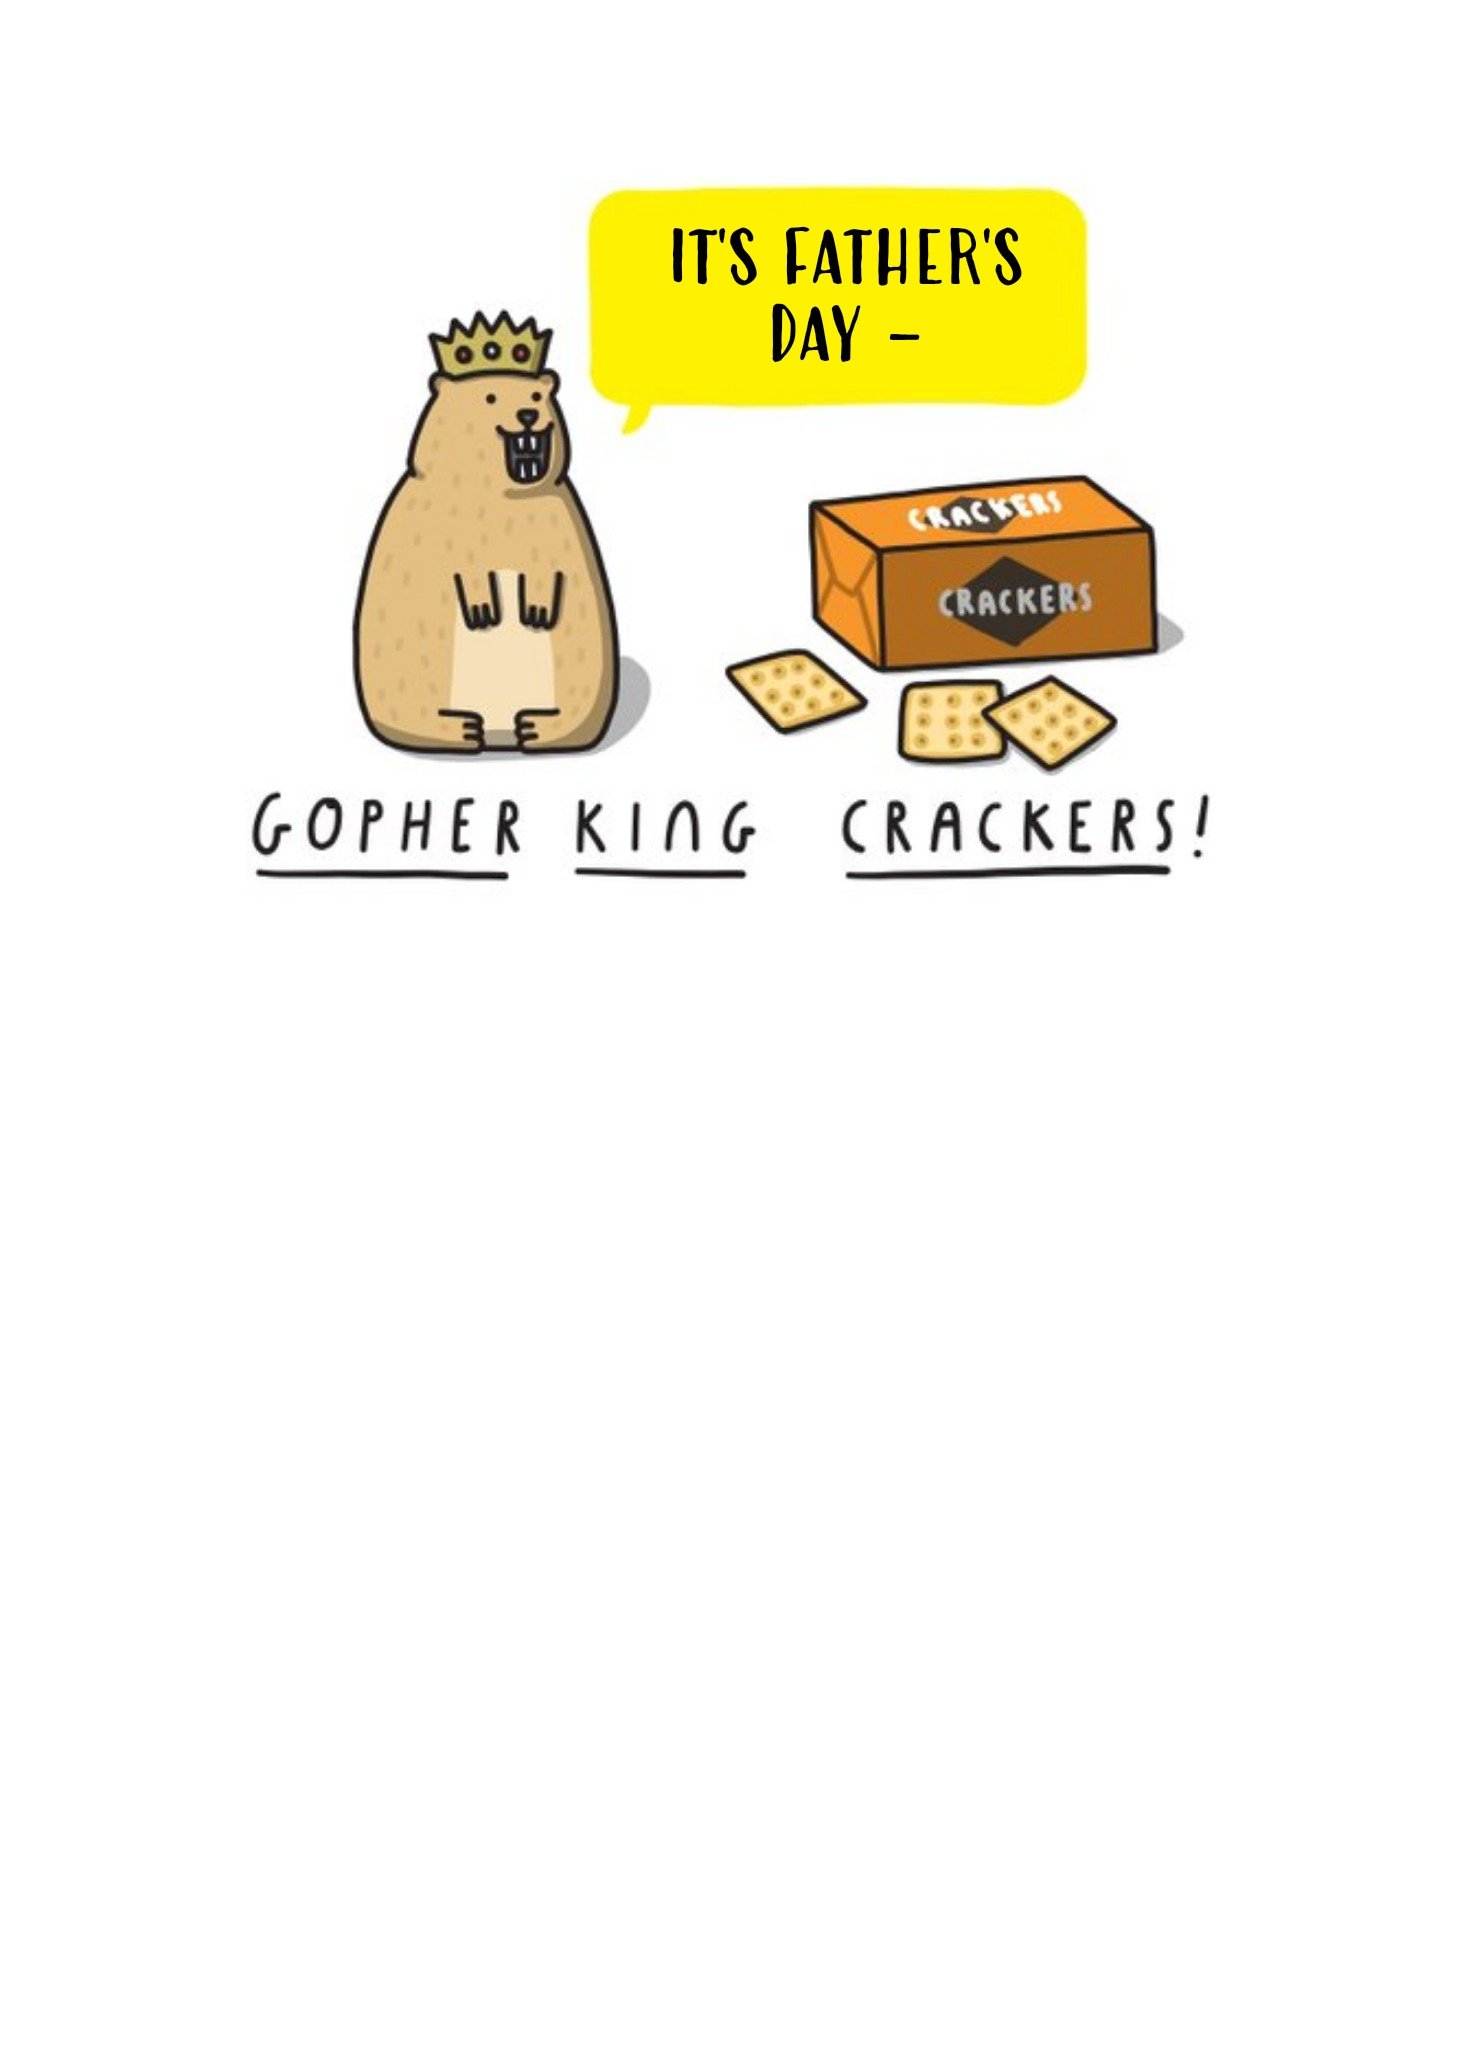 Moonpig Gopher King Crackers Funny Fathers Day Card, Large